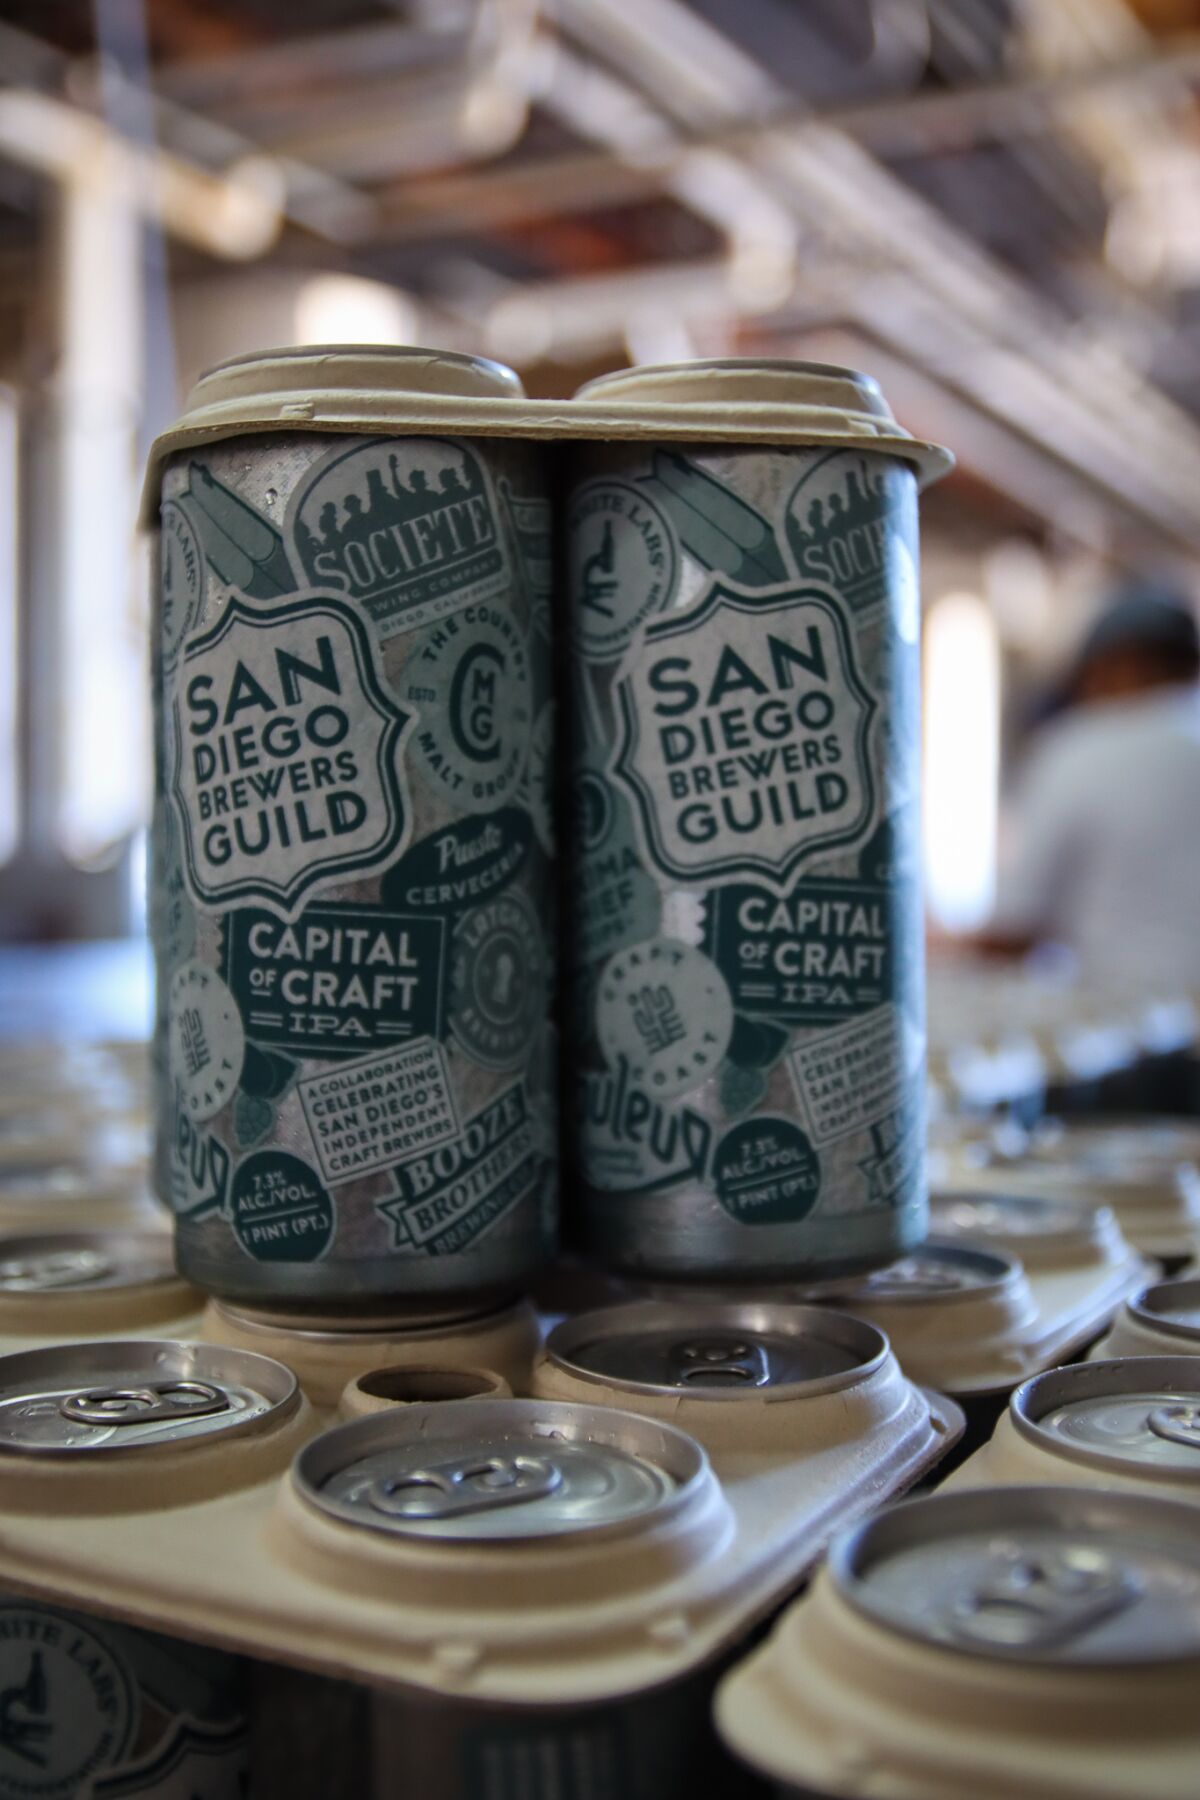 2021 Capital of Craft, an annual collaboration featuring eight breweries, is available in four-packs of 16-ounce cans.